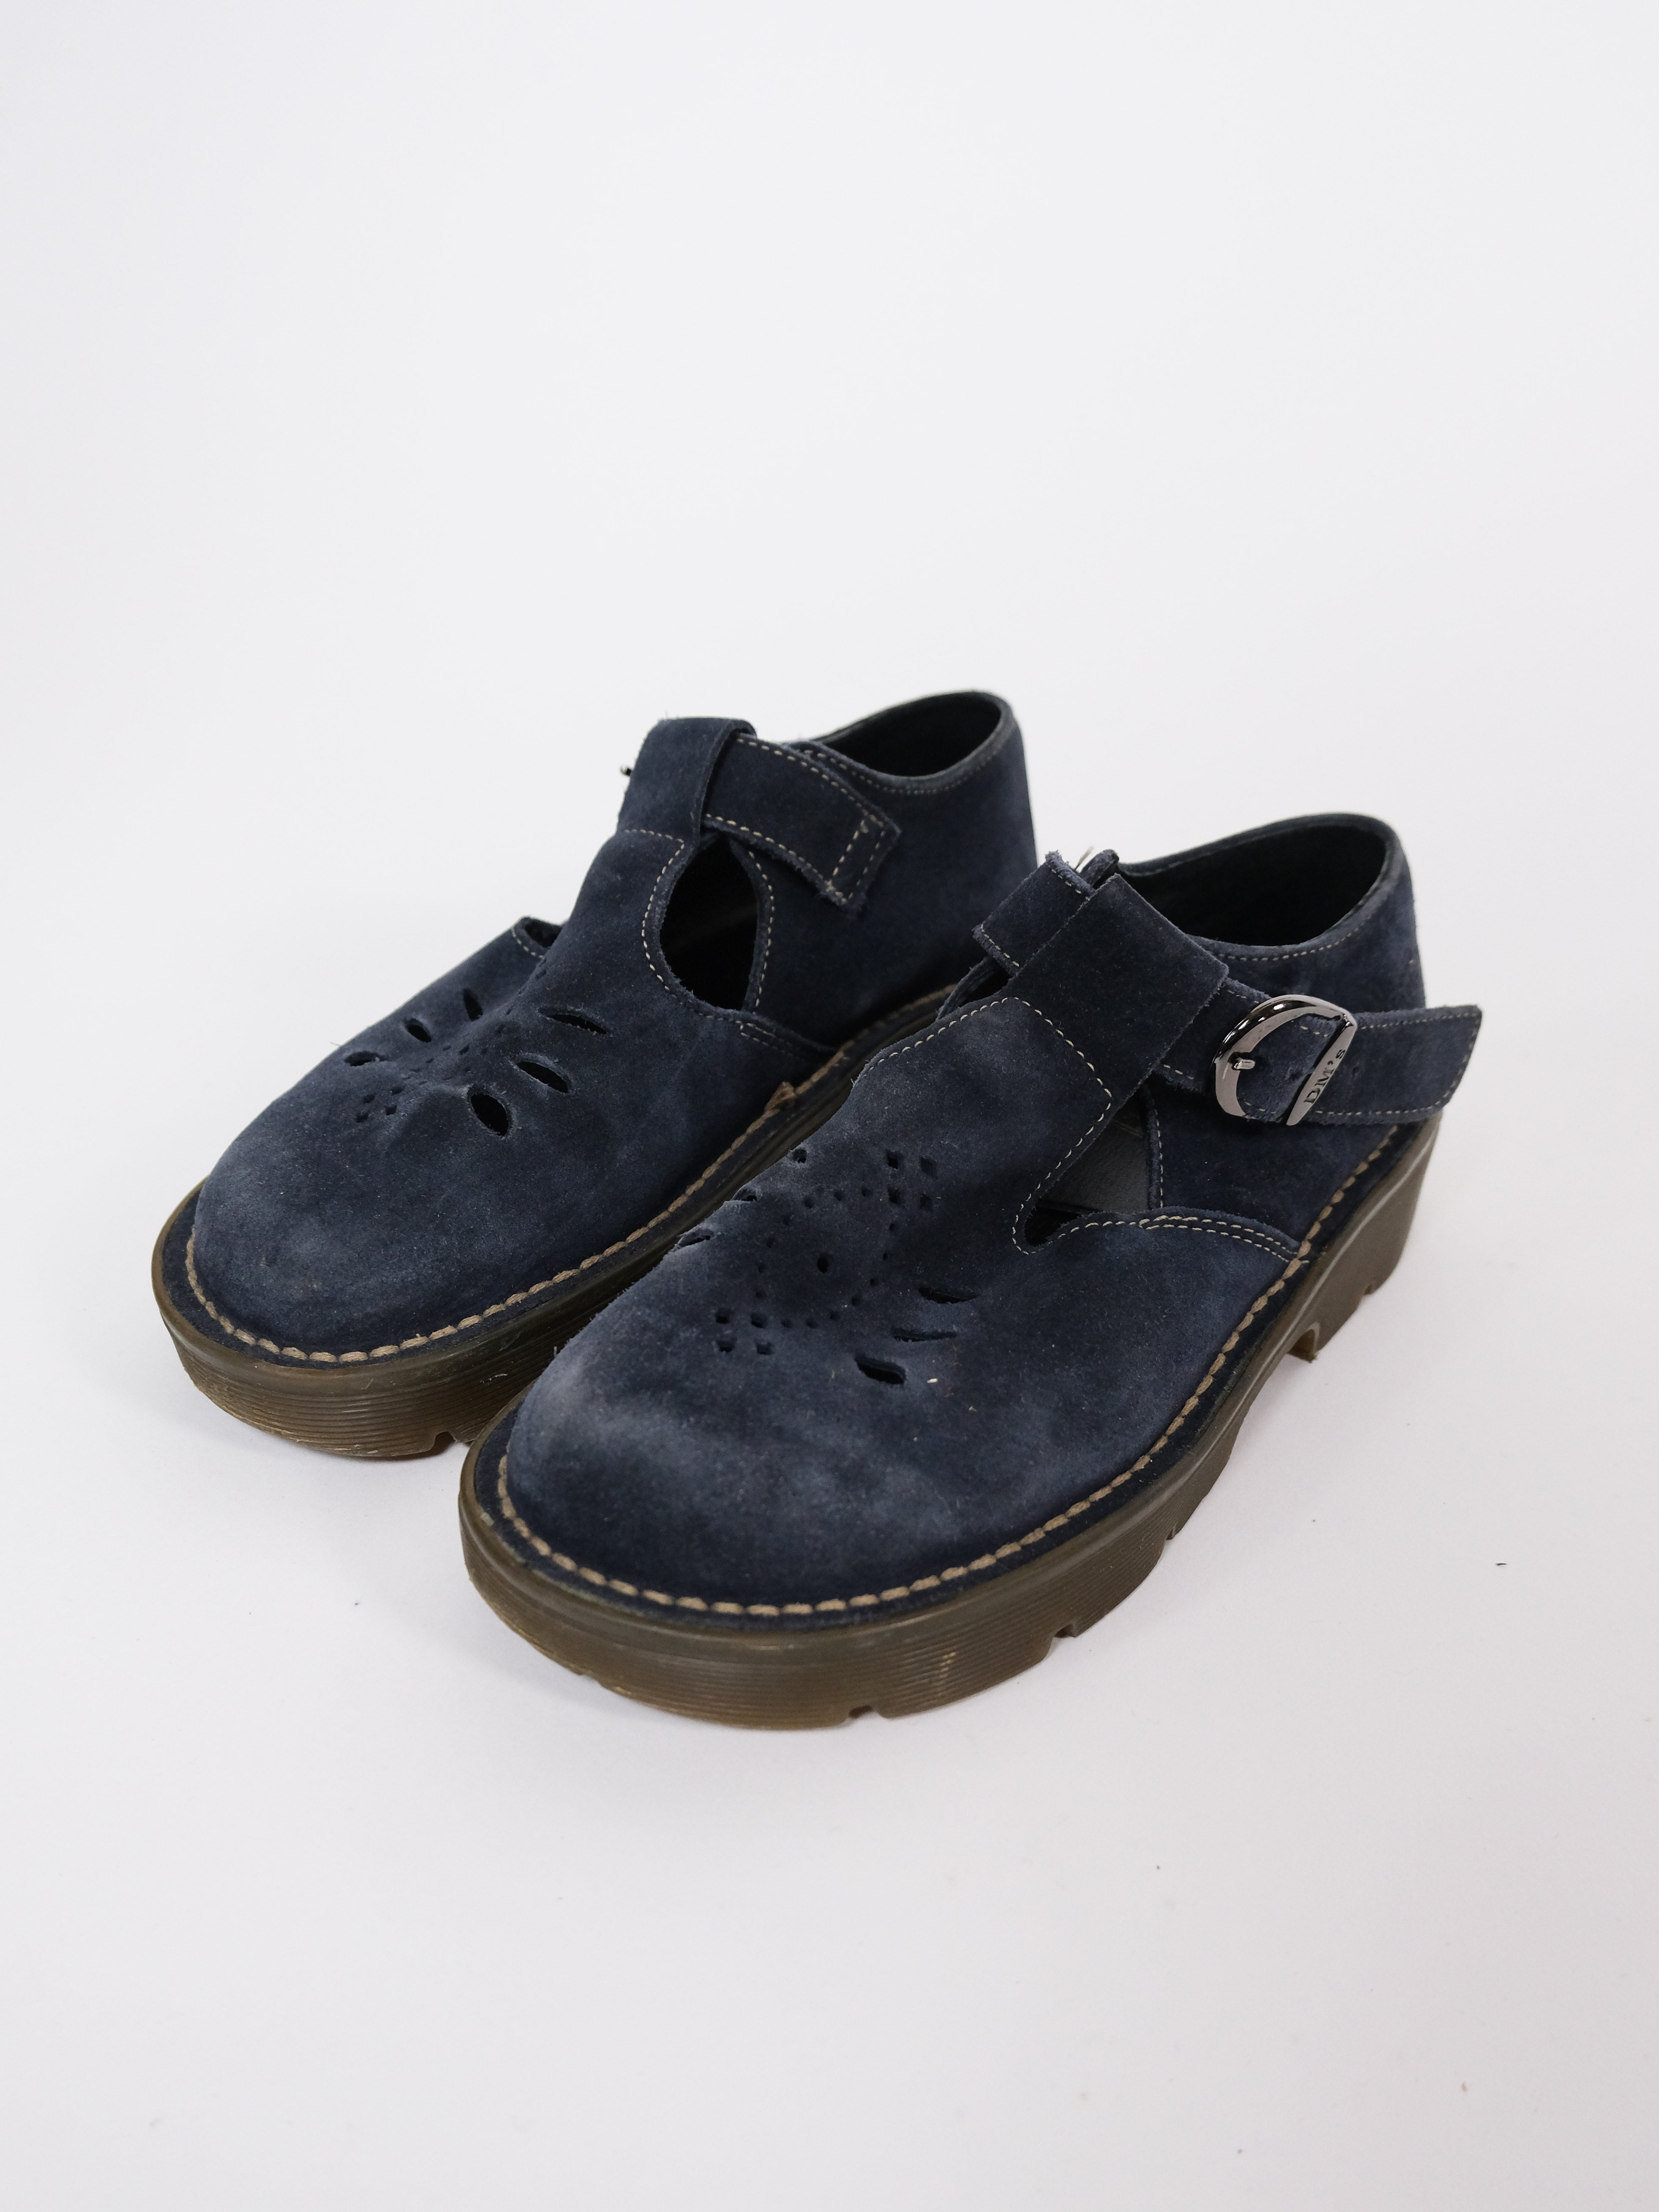 Dr. Martens Mary Jane's blue suede